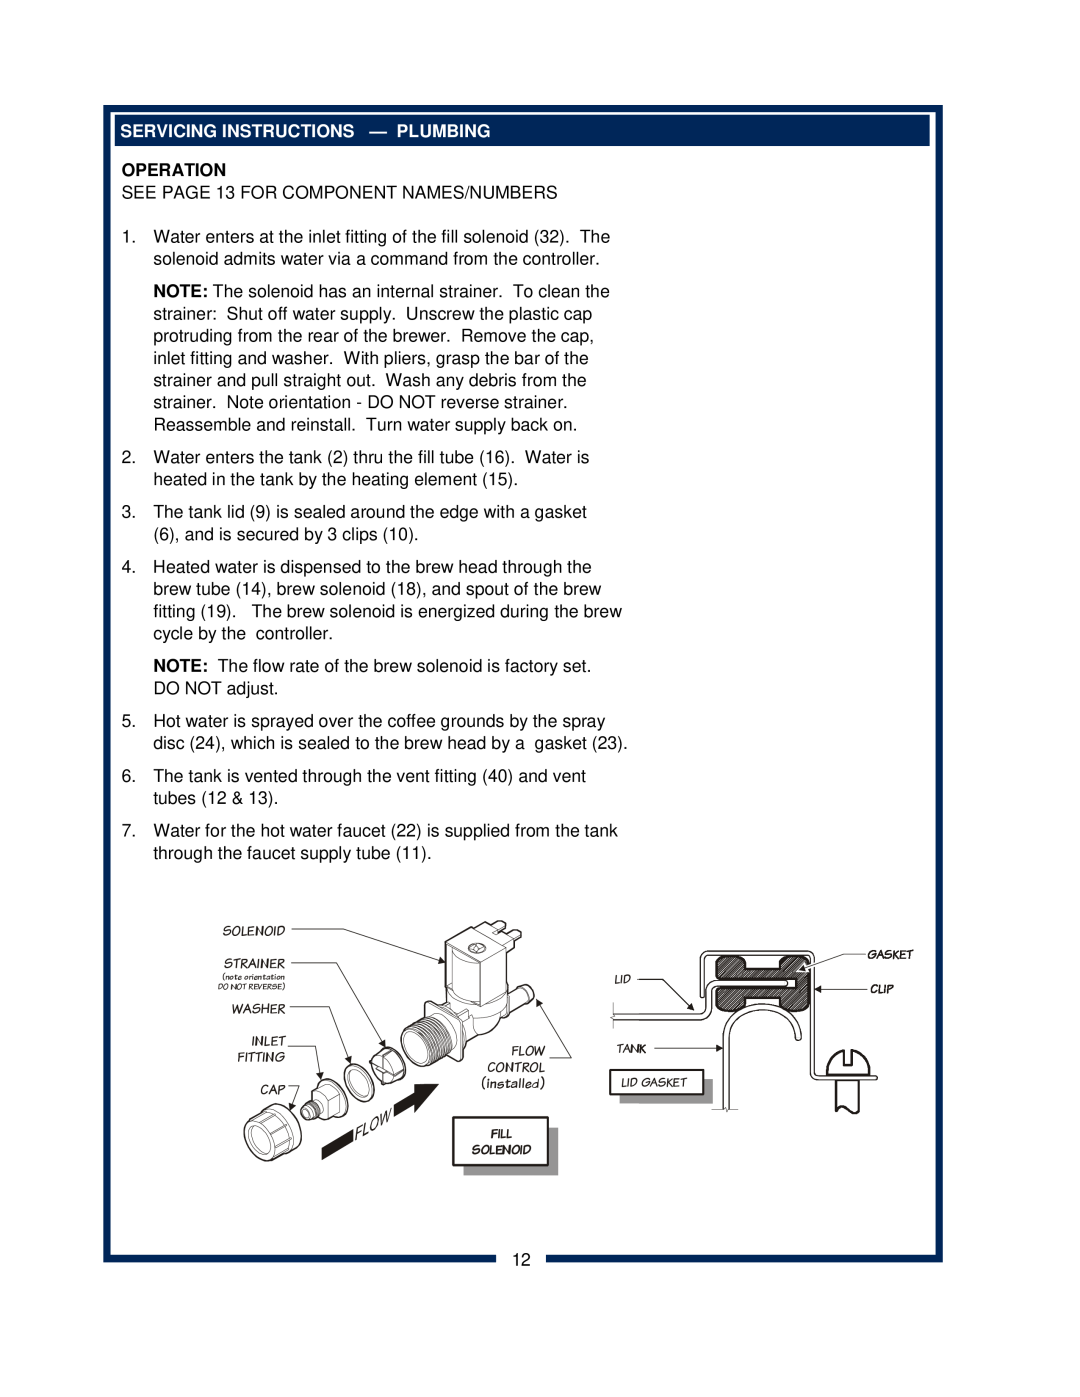 Bloomfield 2272, 2216EX, 2274EX, 2212 owner manual Servicing Instructions - Plumbing 